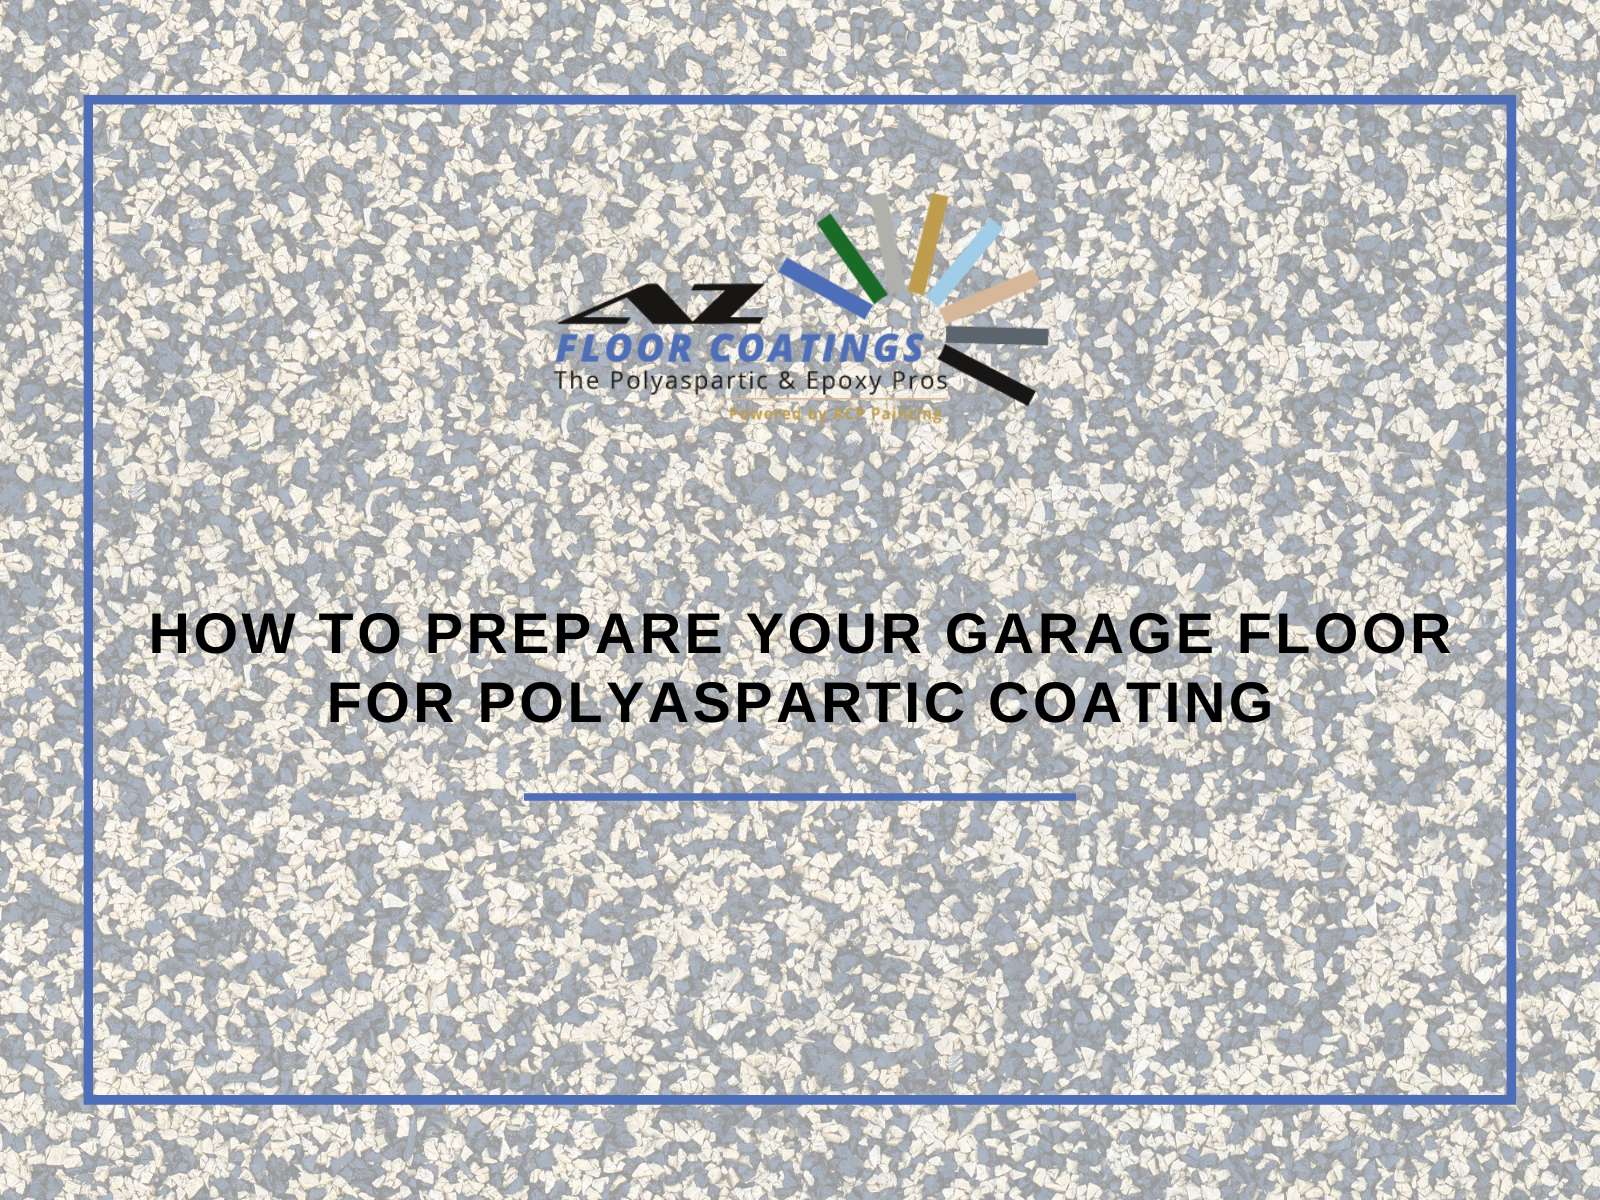 How To Prepare Your Garage Floor For Polyaspartic Coating